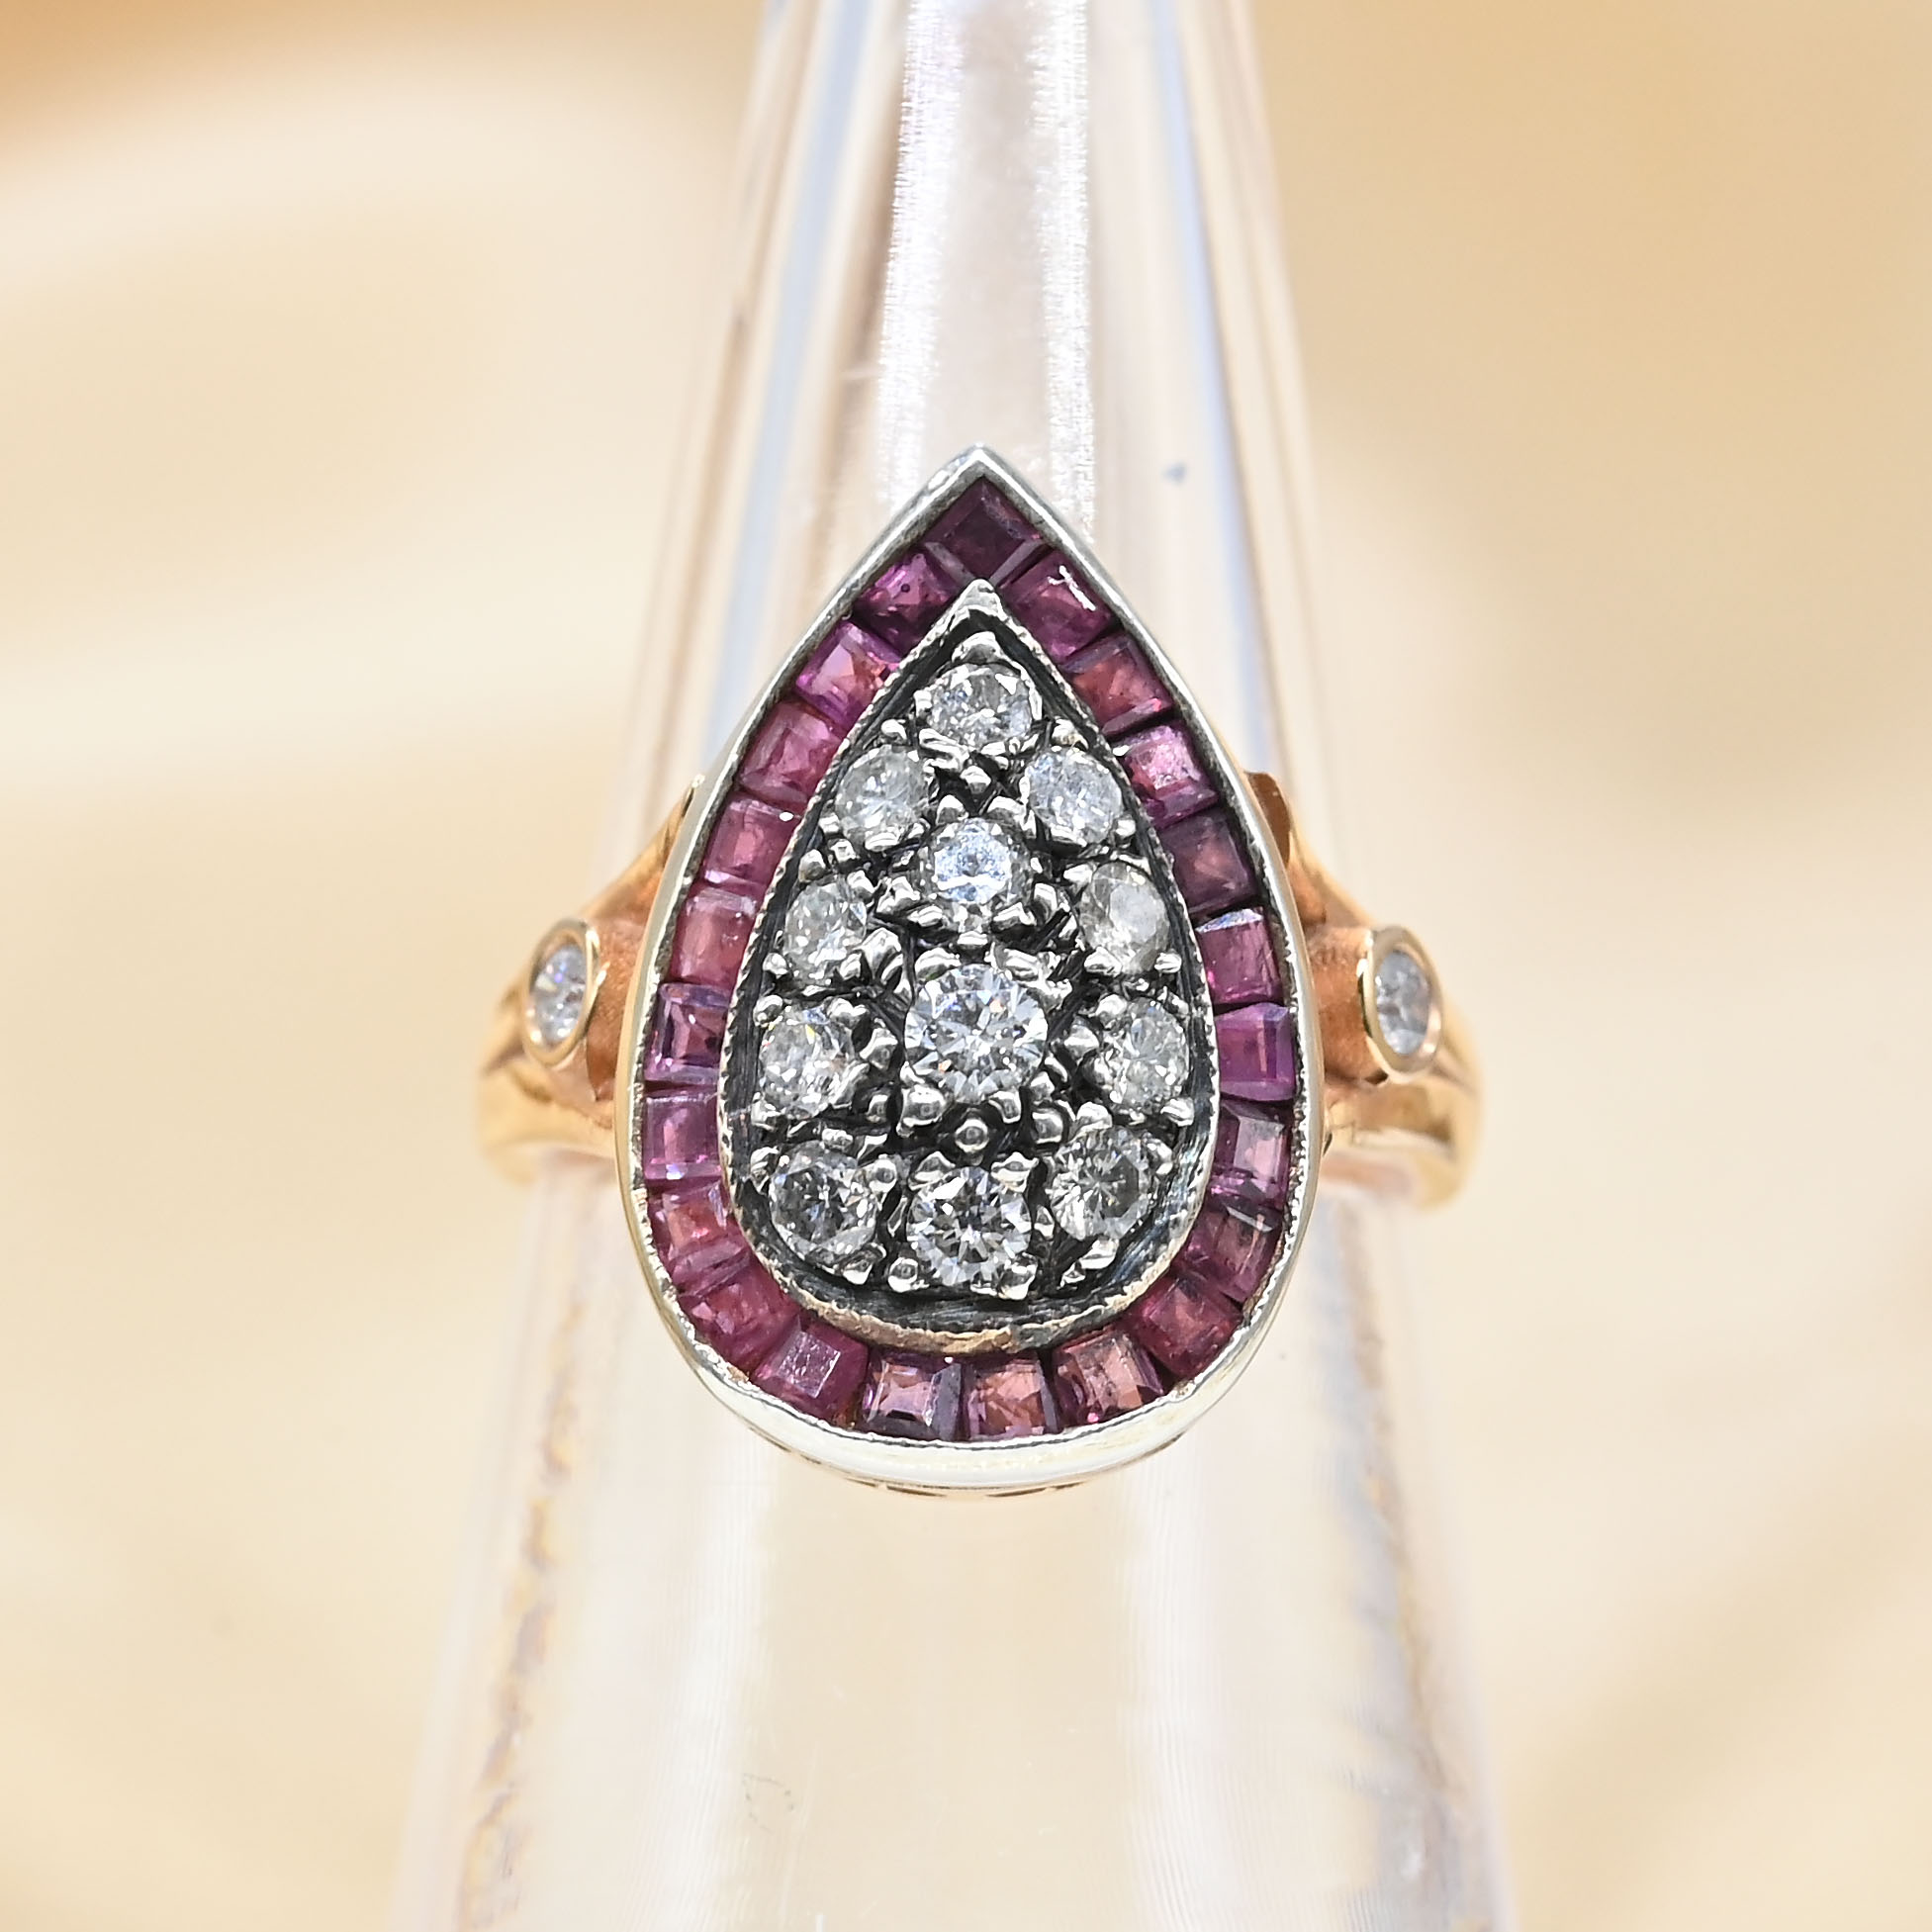 Hand-Made, Vintage Style Ruby and Diamond Pear-Shaped Ring - Image 2 of 8